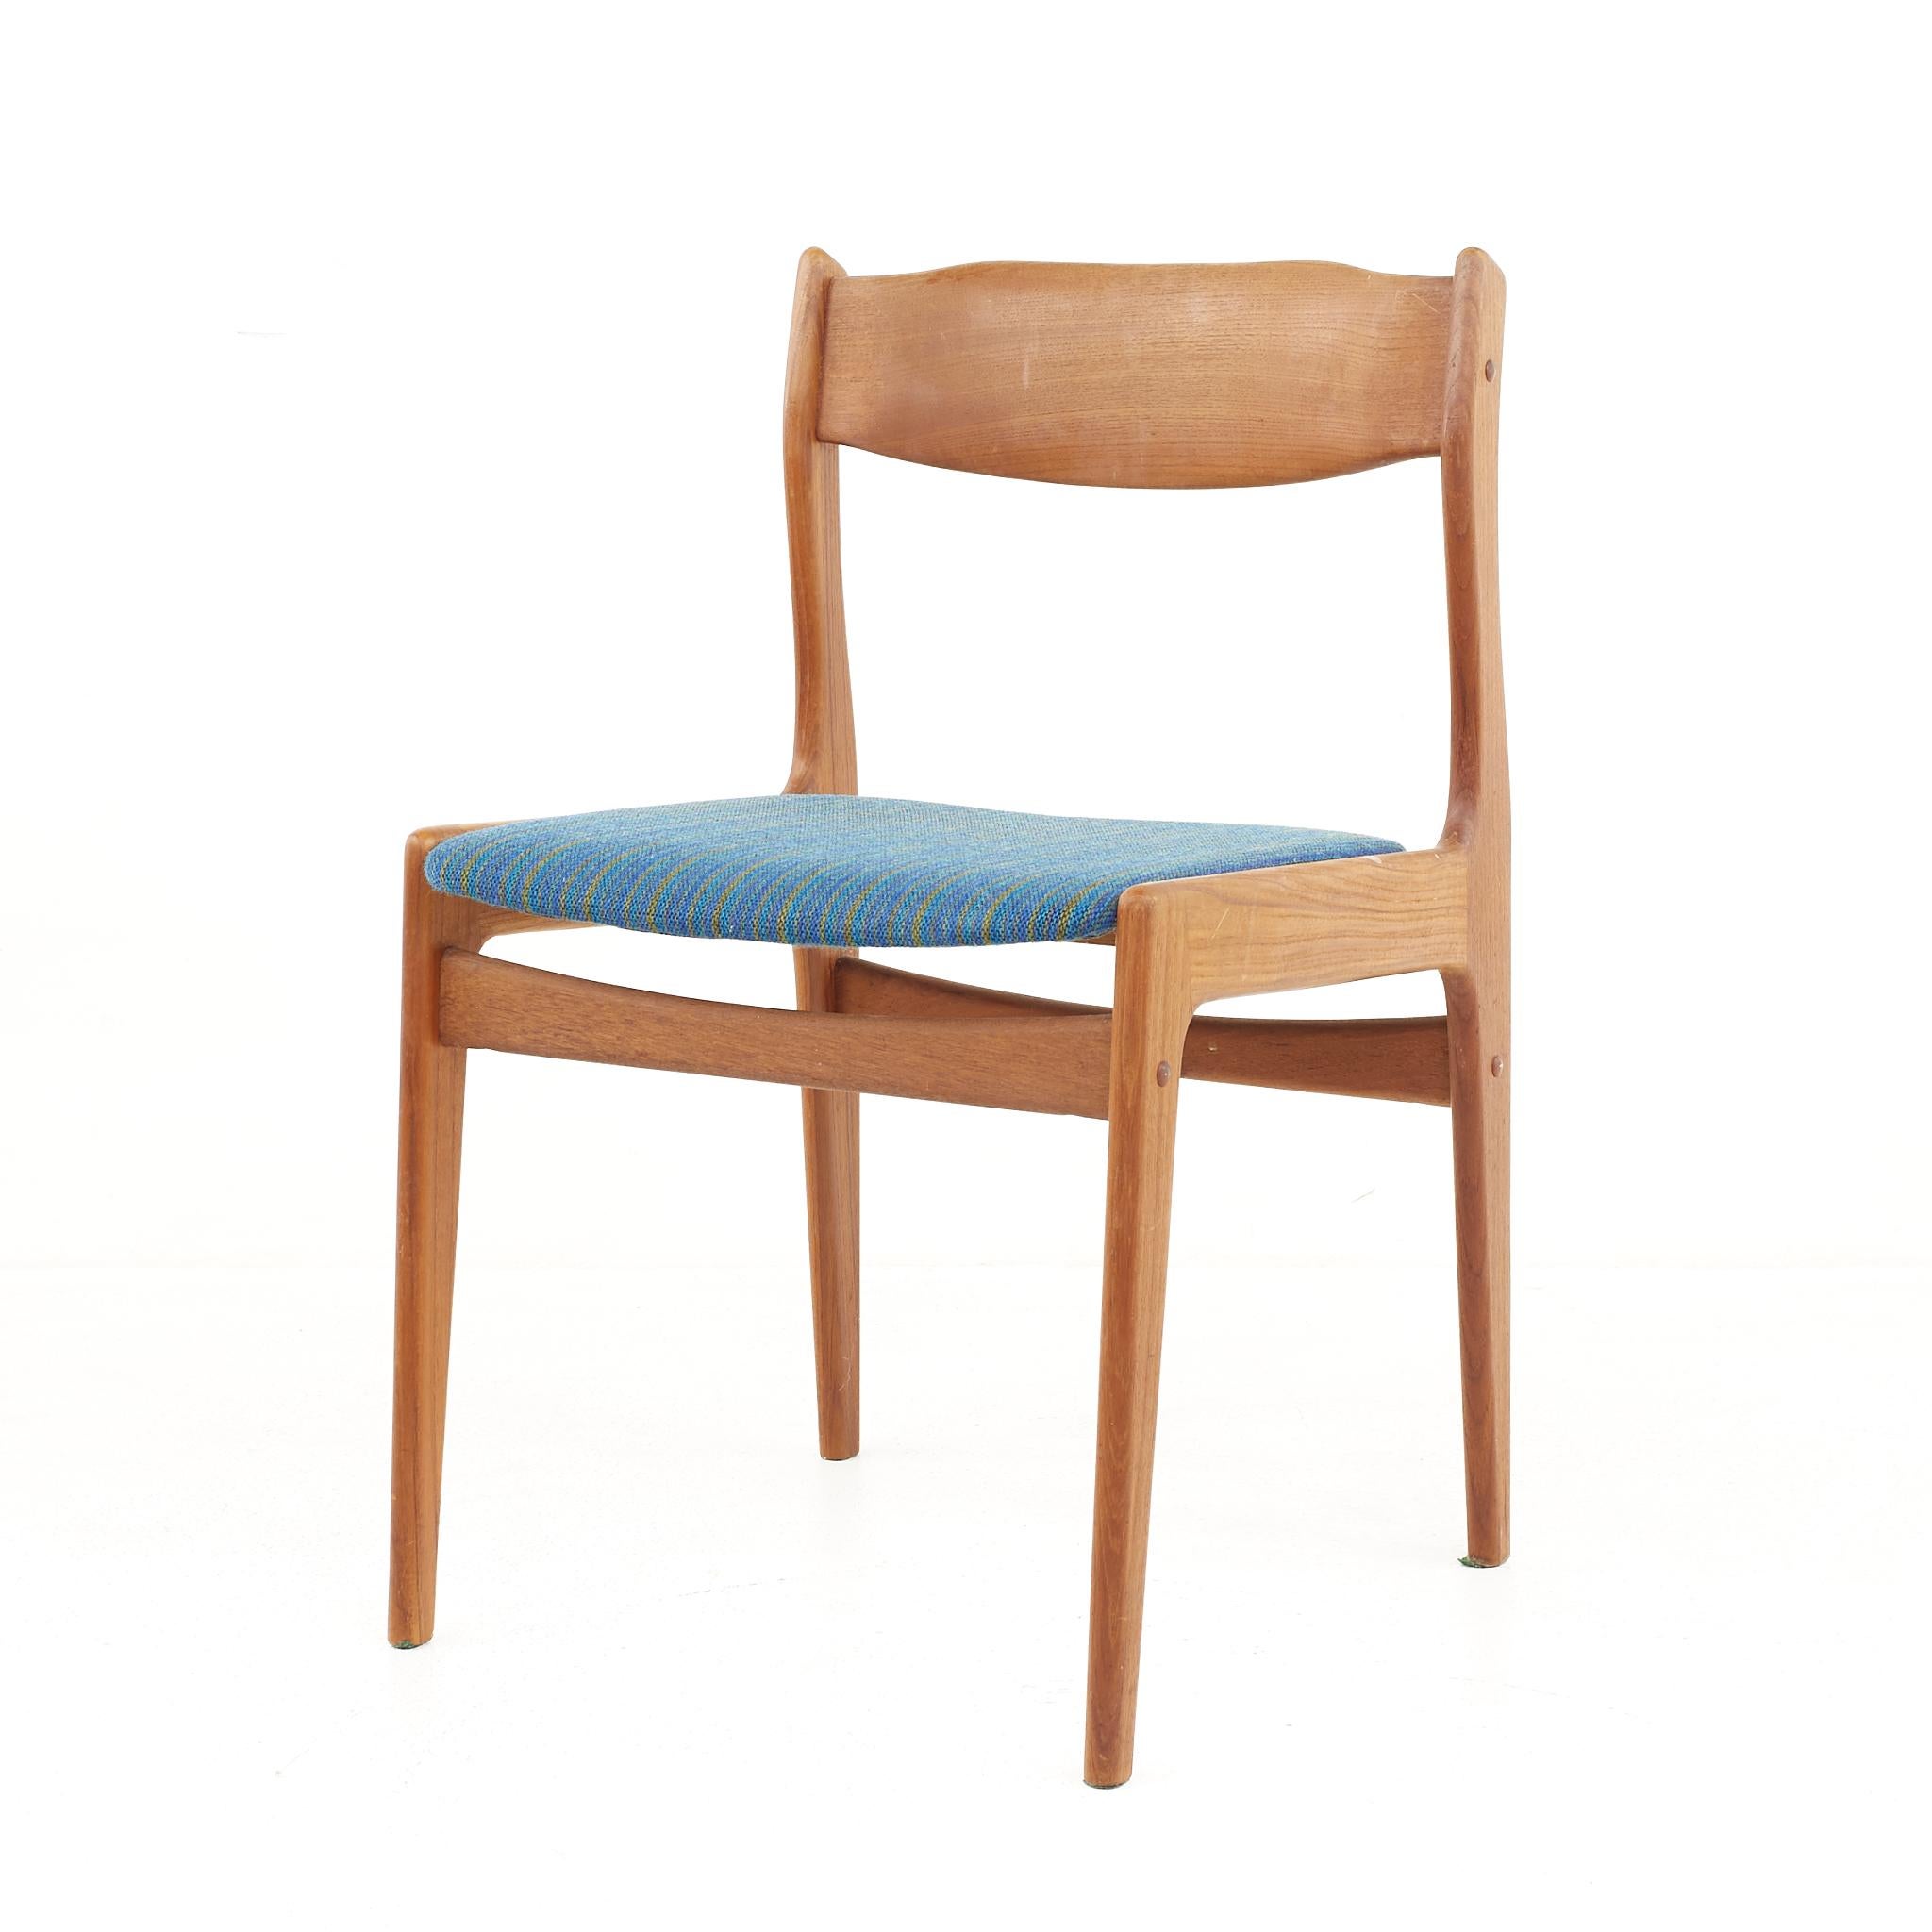 Late 20th Century Mid Century Danish Teak Side Chairs, a Pair For Sale